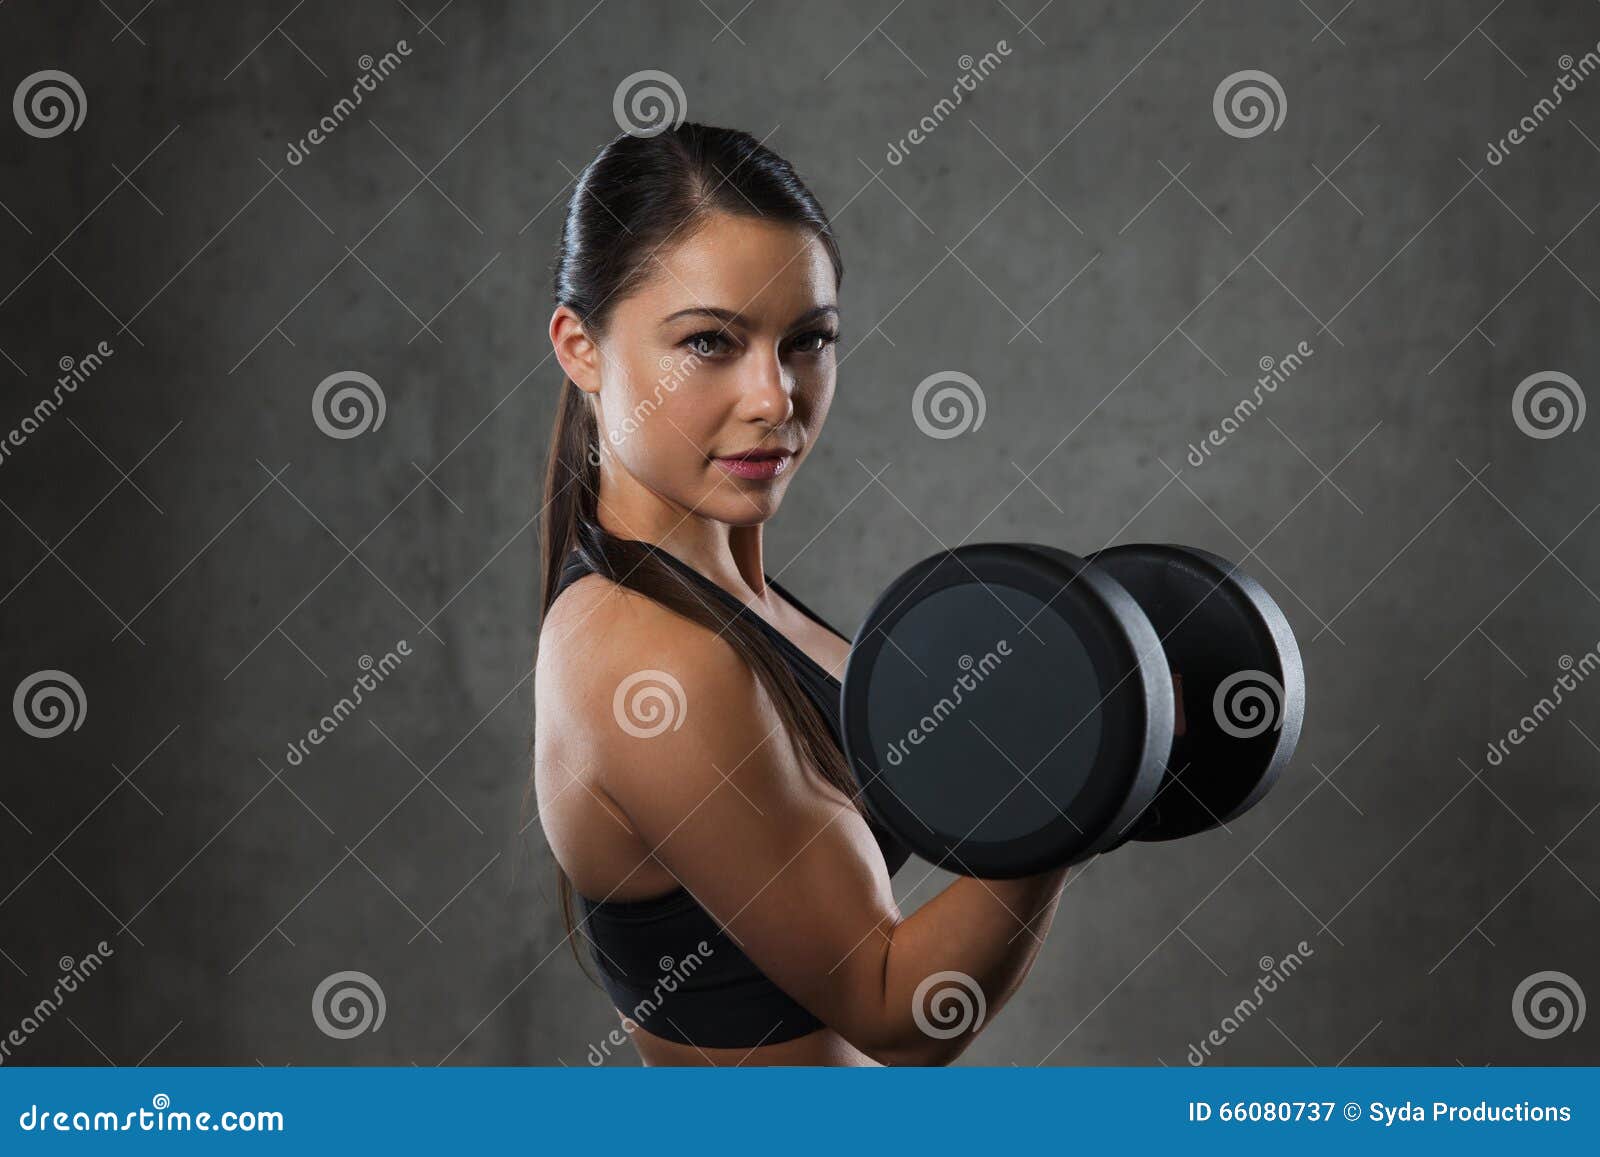 7,147 Woman Flexing Muscles Stock Photos - Free & Royalty-Free